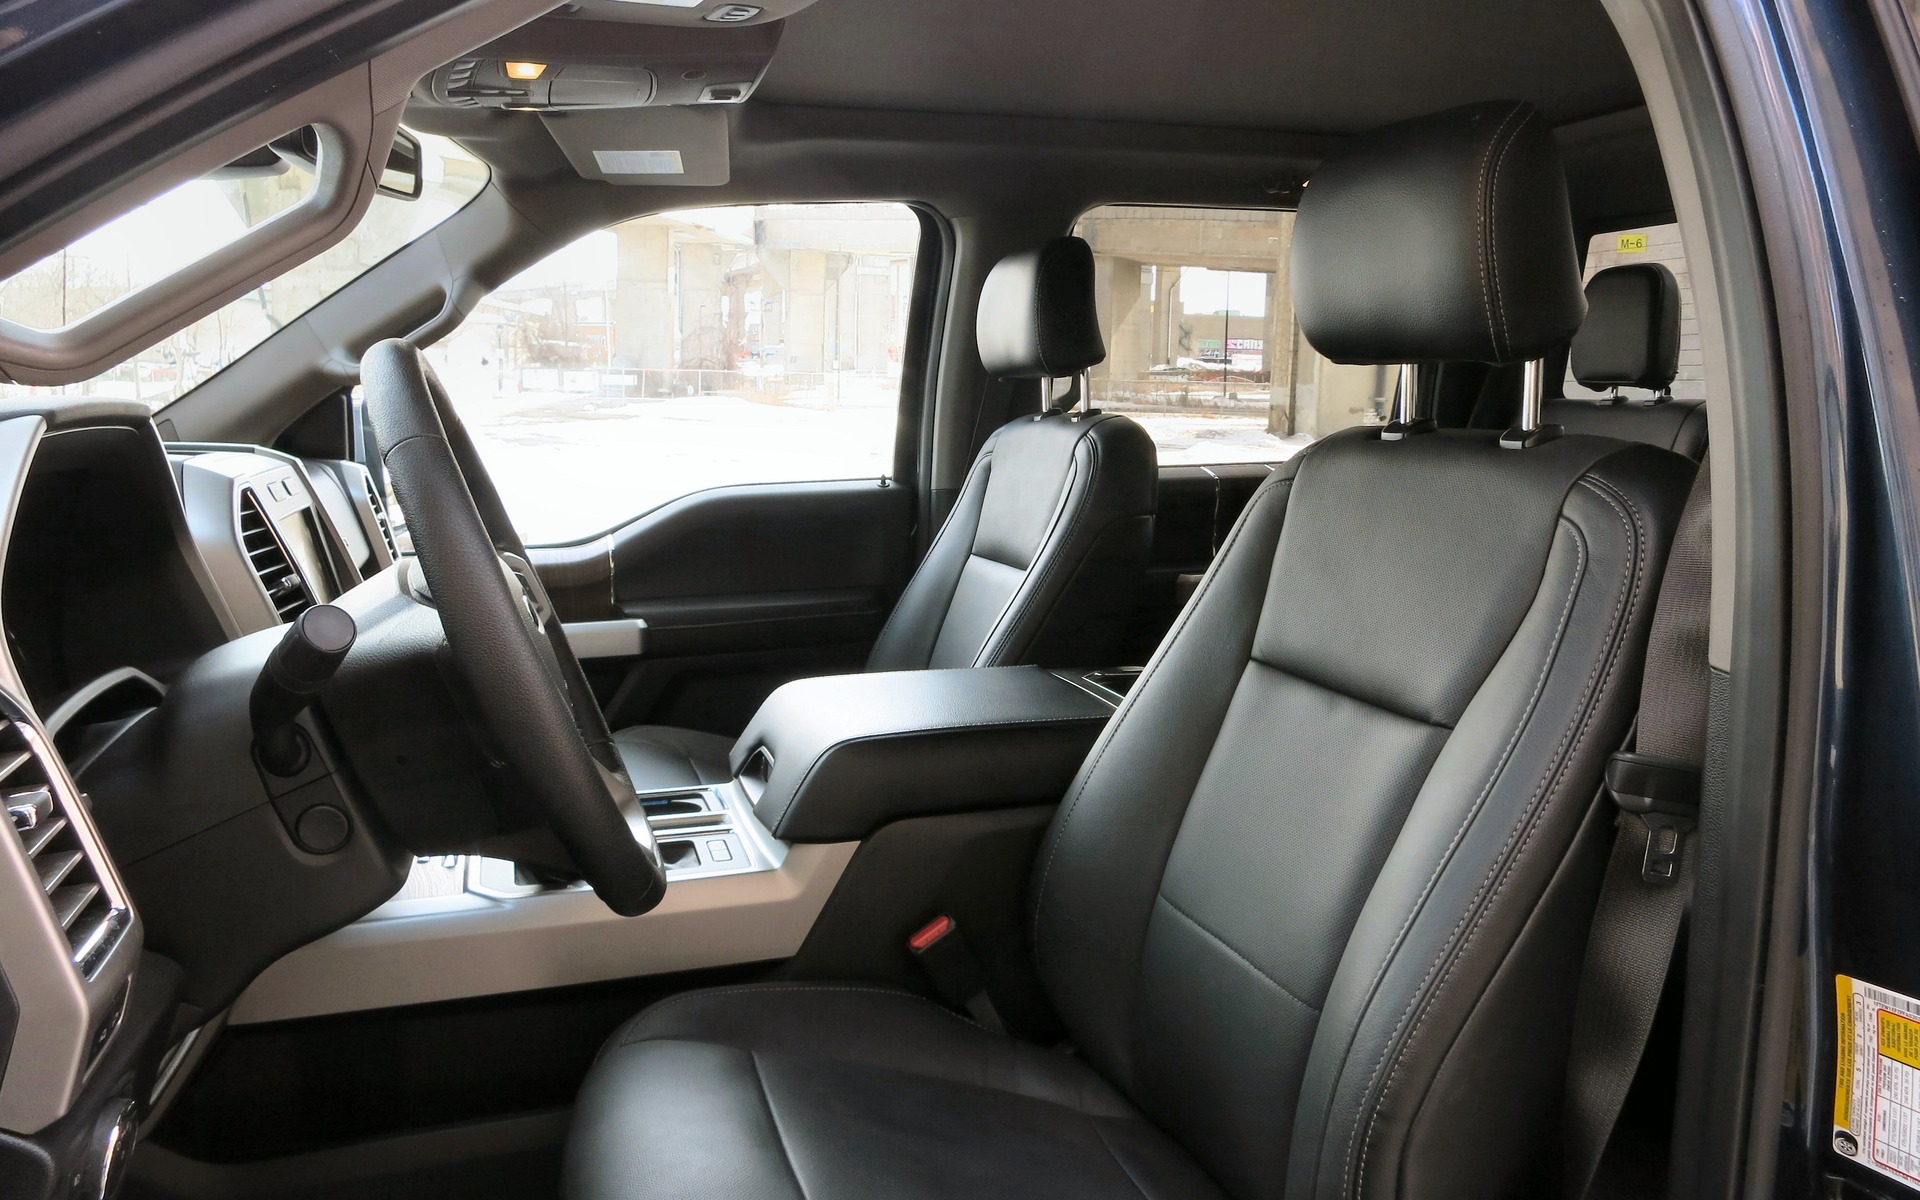 The interior of the Ford F-150 reflects its $60k+ price tag.